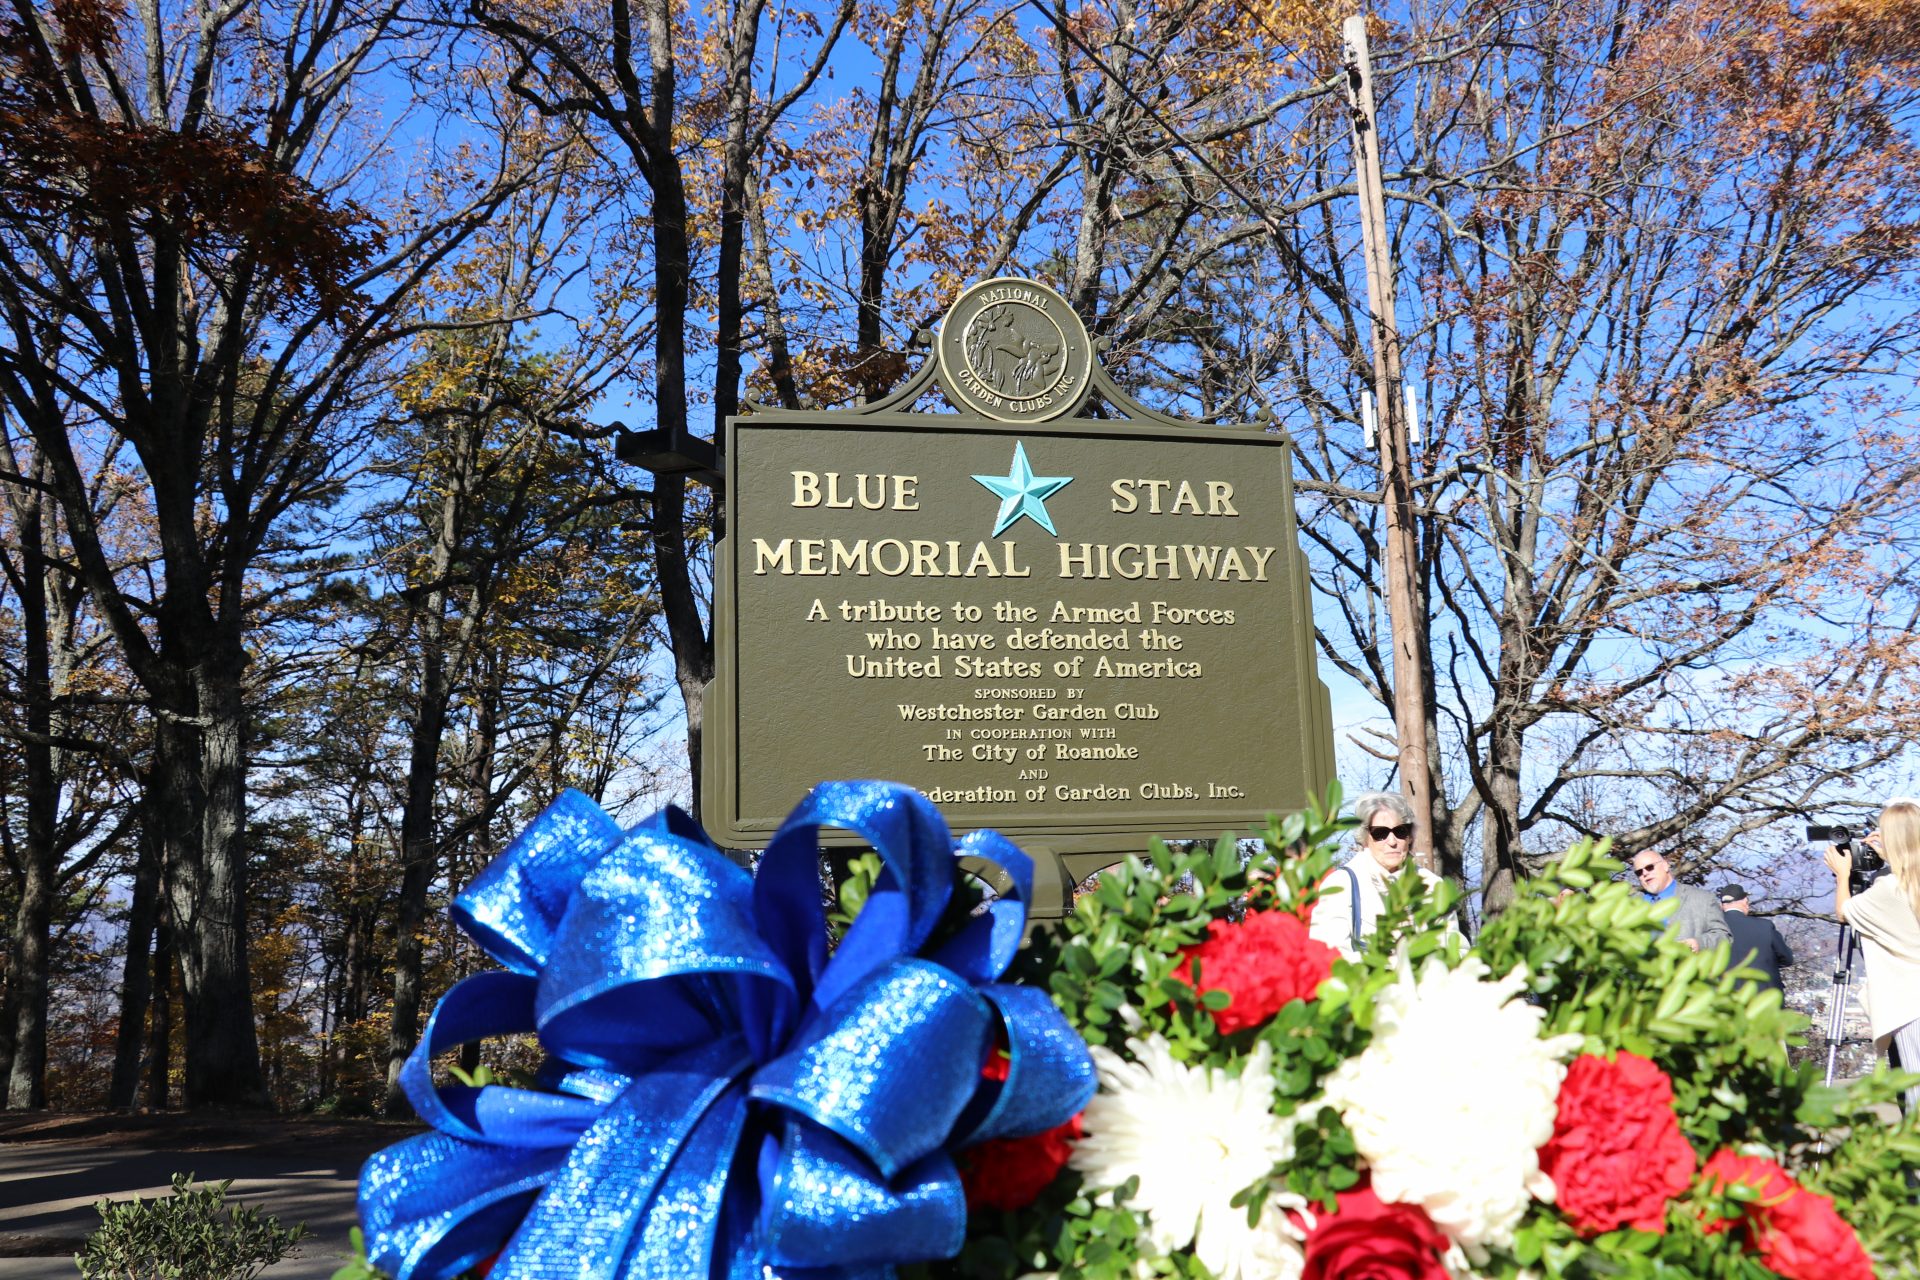 New Blue Star Memorial Marker with large wreath in the foreground.